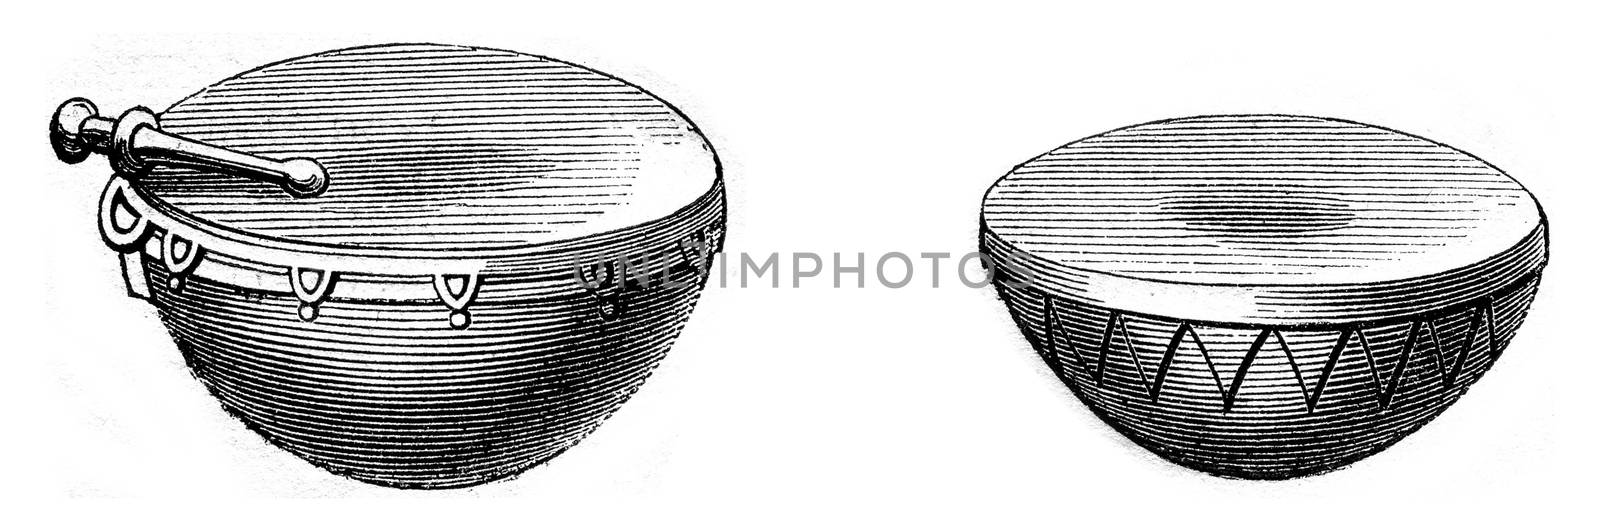 Ancient timpani for dance, Ancient timpani for war, vintage engraved illustration. Magasin Pittoresque 1869.
